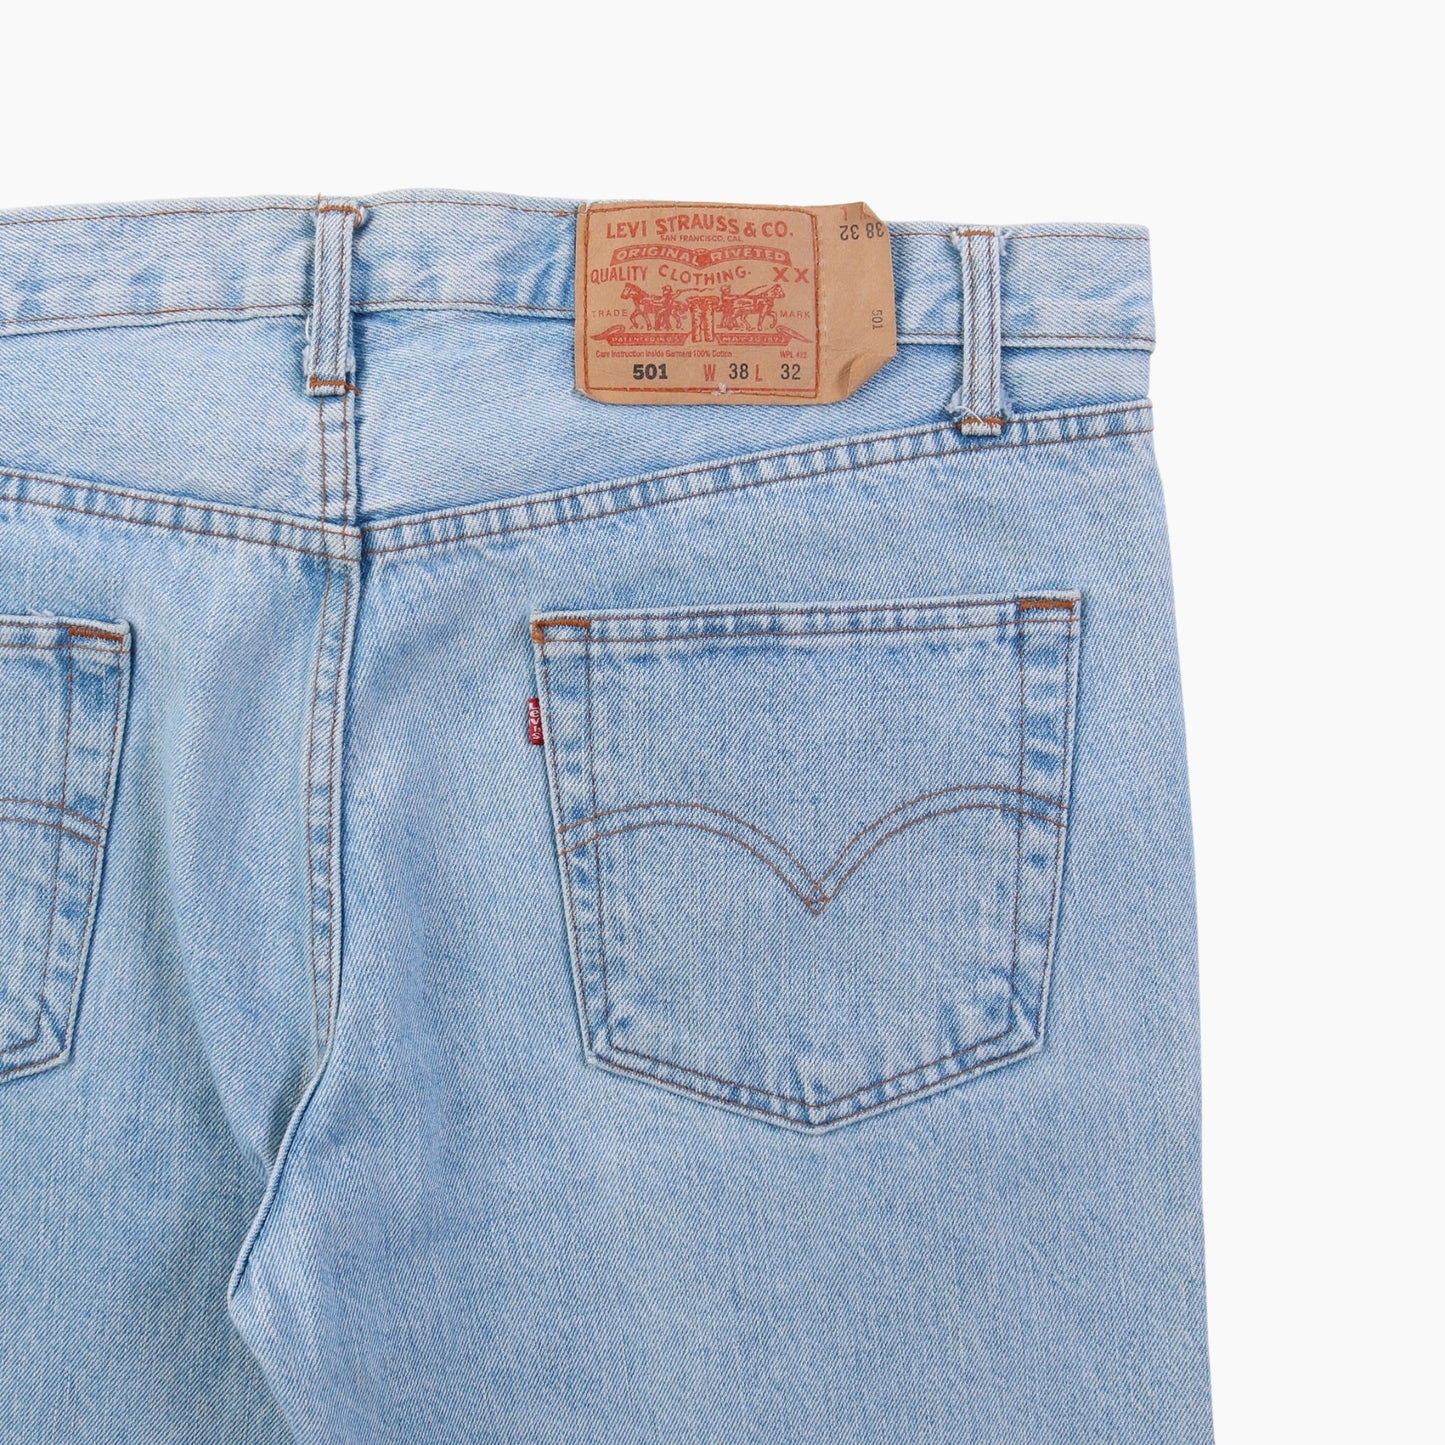 Vintage 501 Jeans - 38" 32" - American Madness